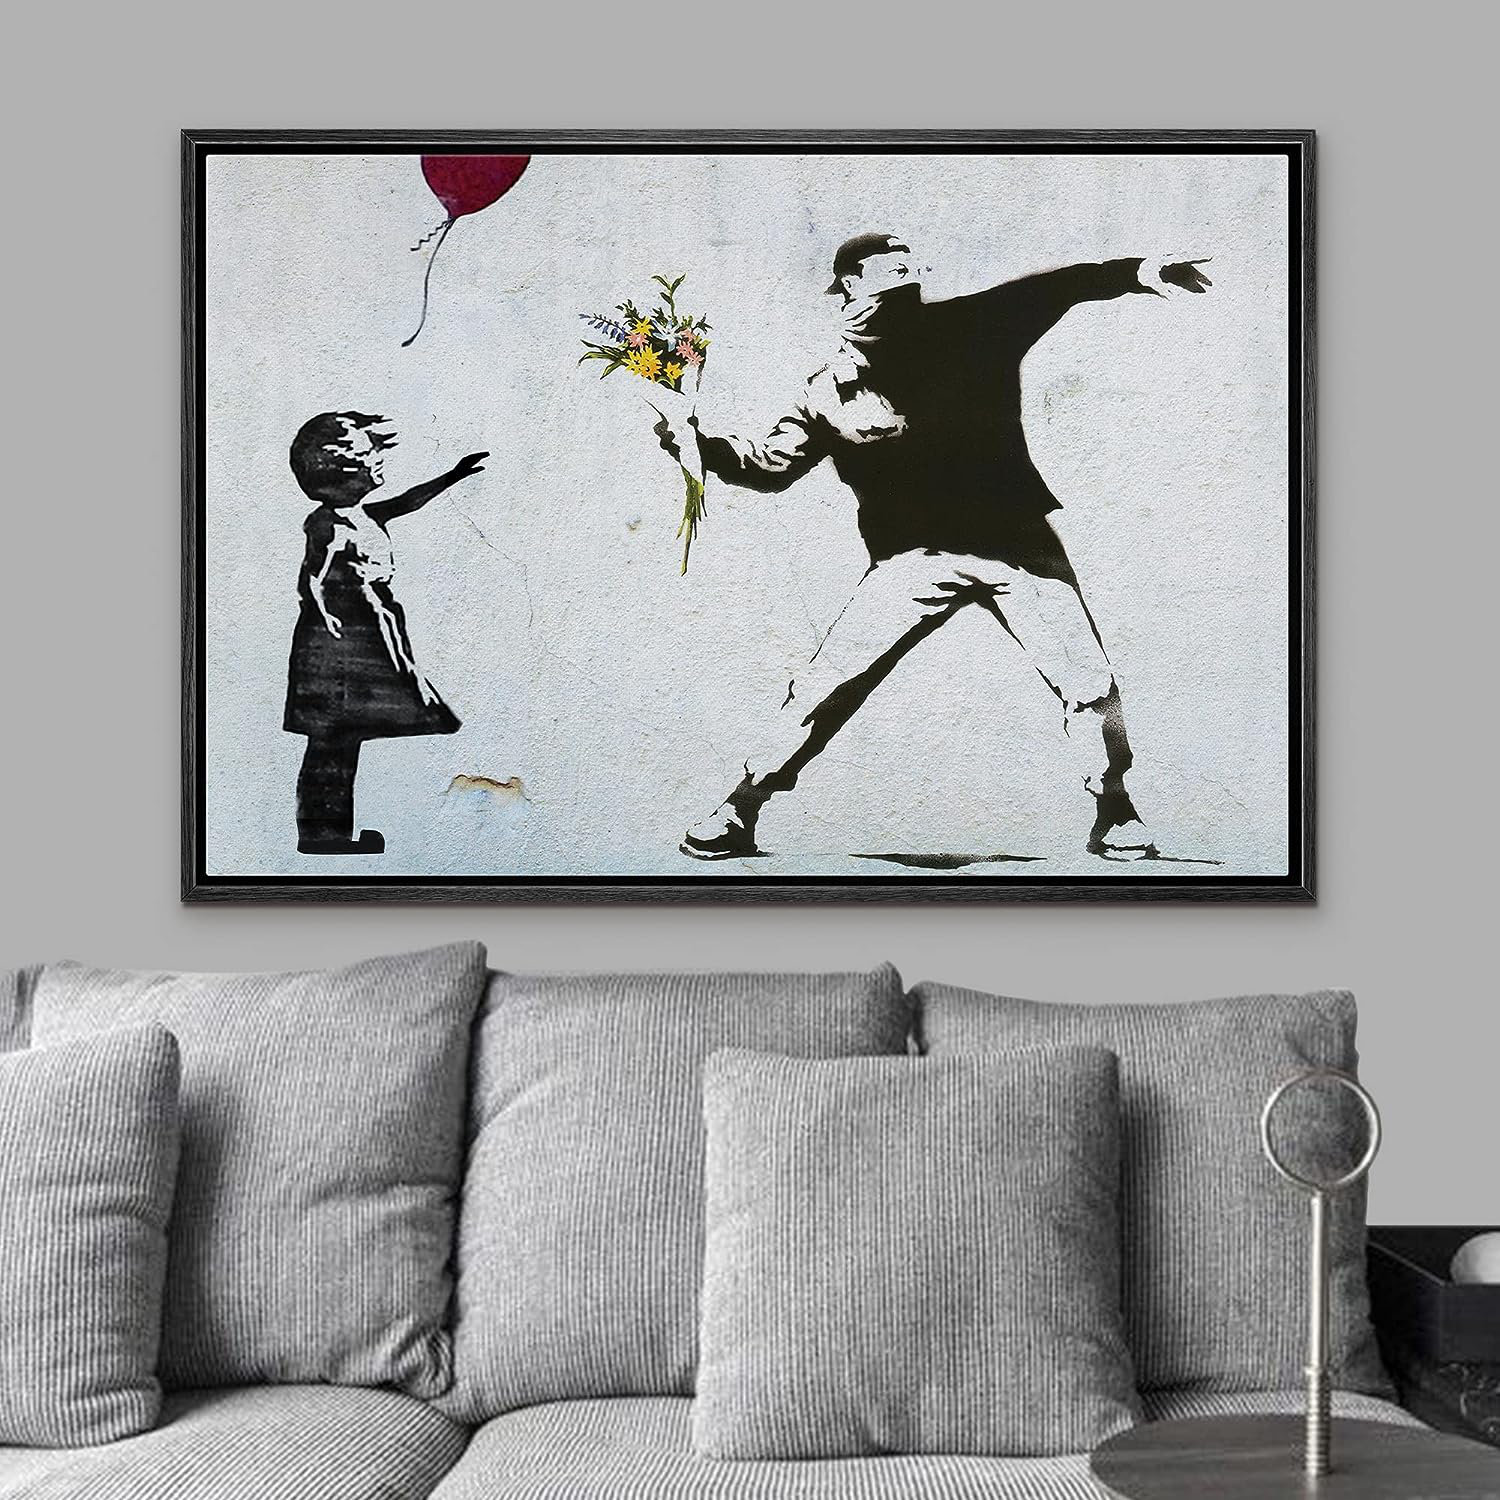 Banksy Flower Thrower Street Art - 8x10 Photo Poster - Cool Unique Gift for  Urban Mural and Graffiti Fans - Unframed Picture Print